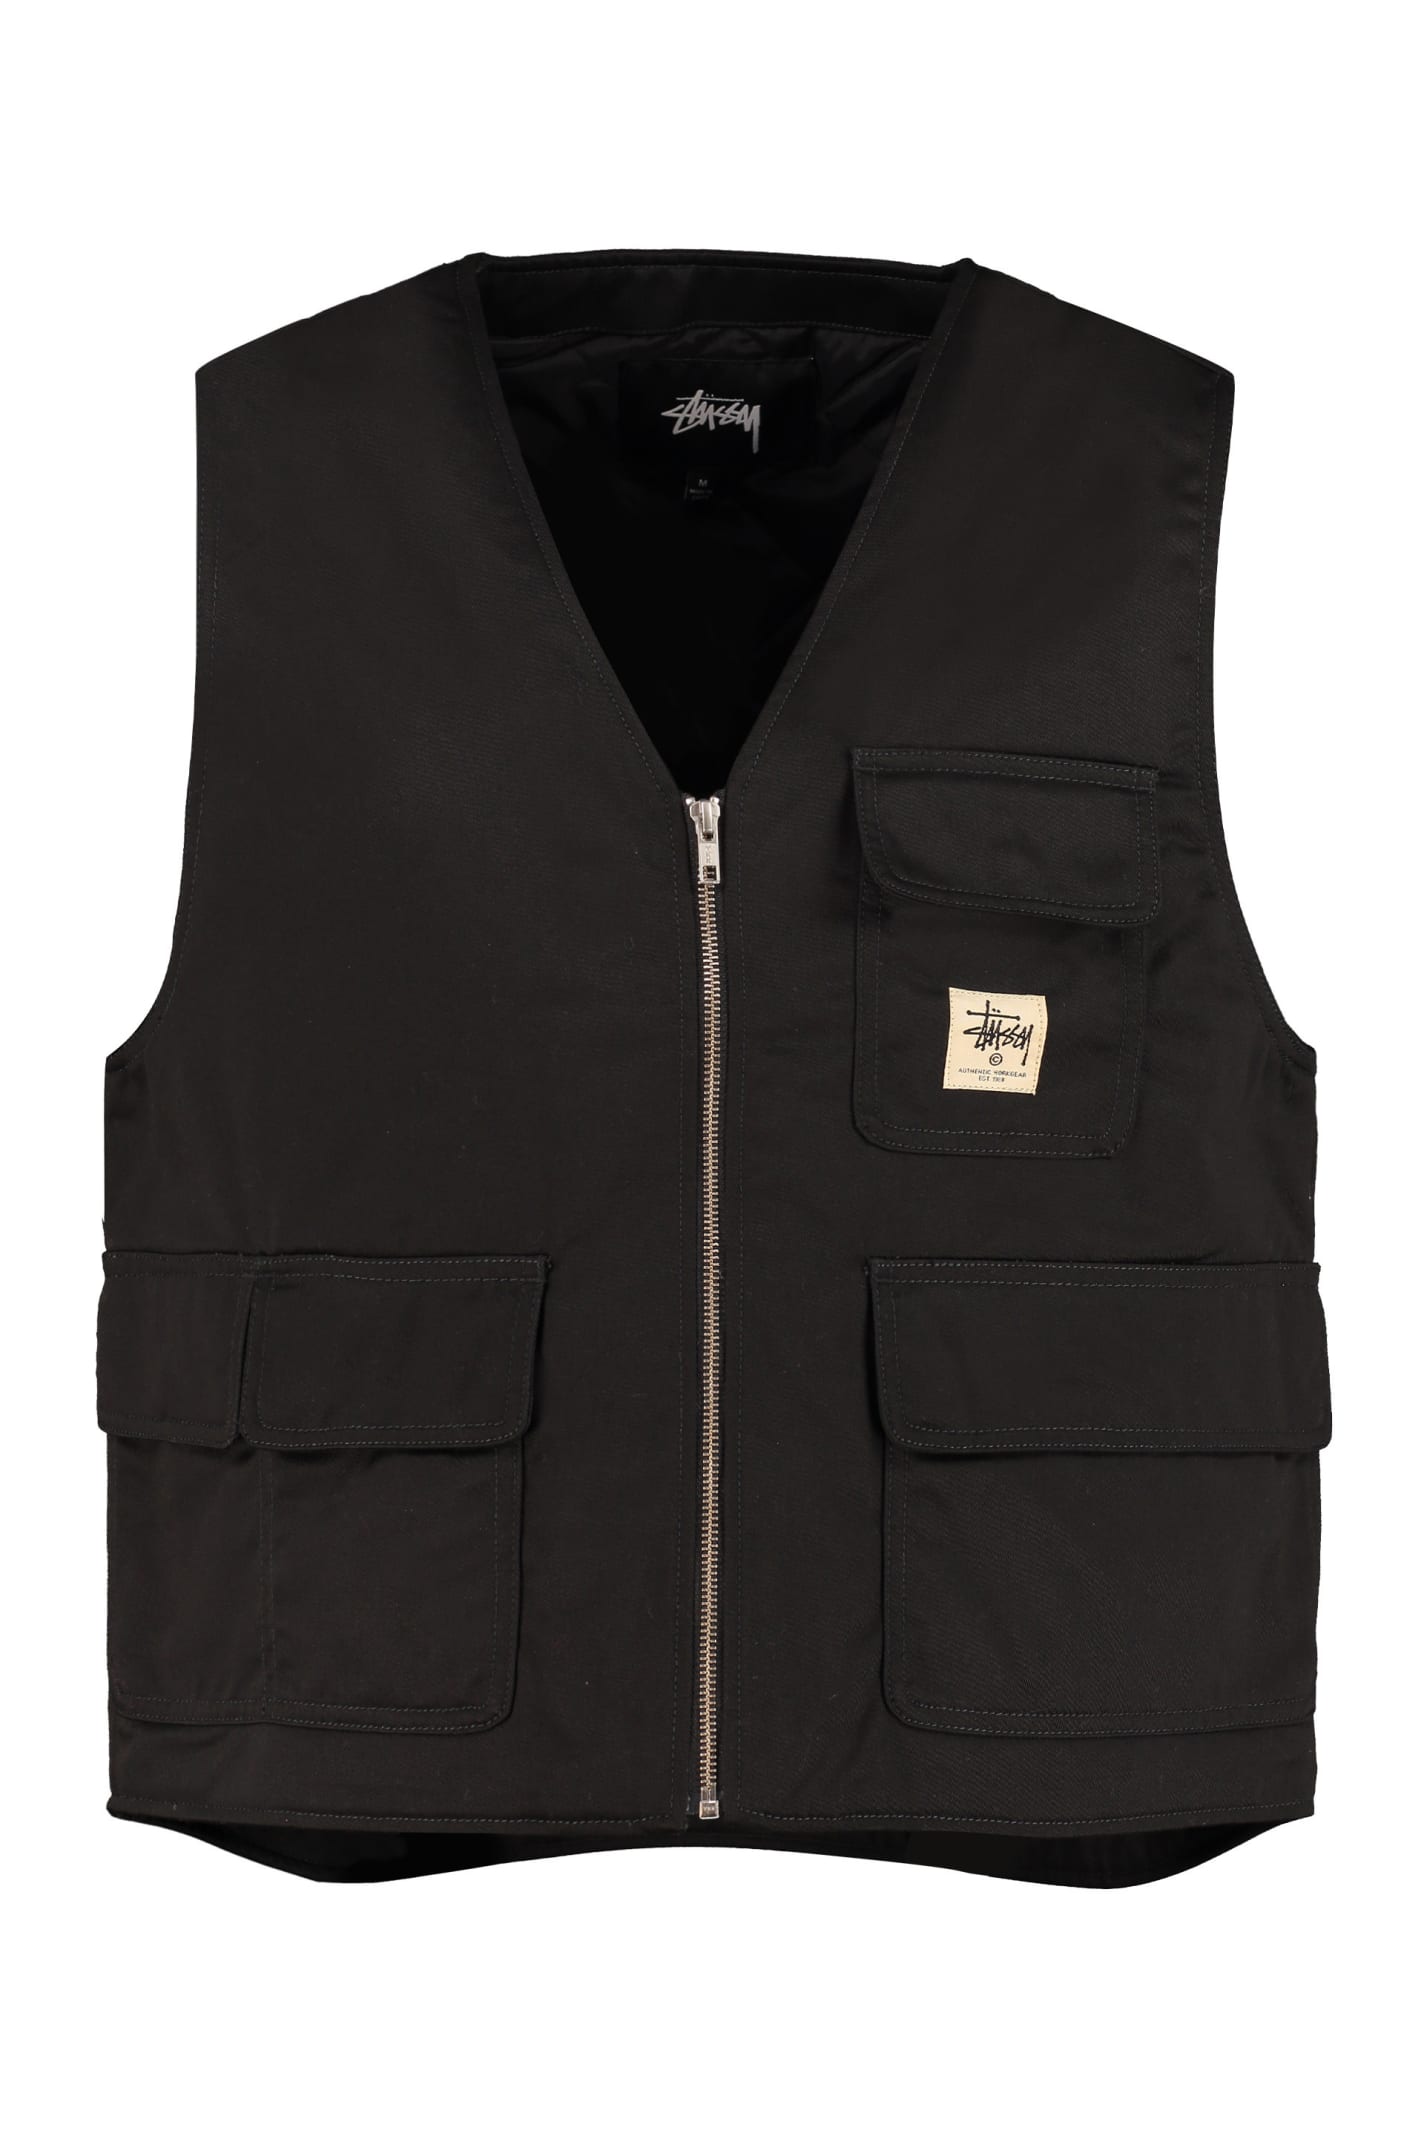 Stussy Insulated Fabric Vest